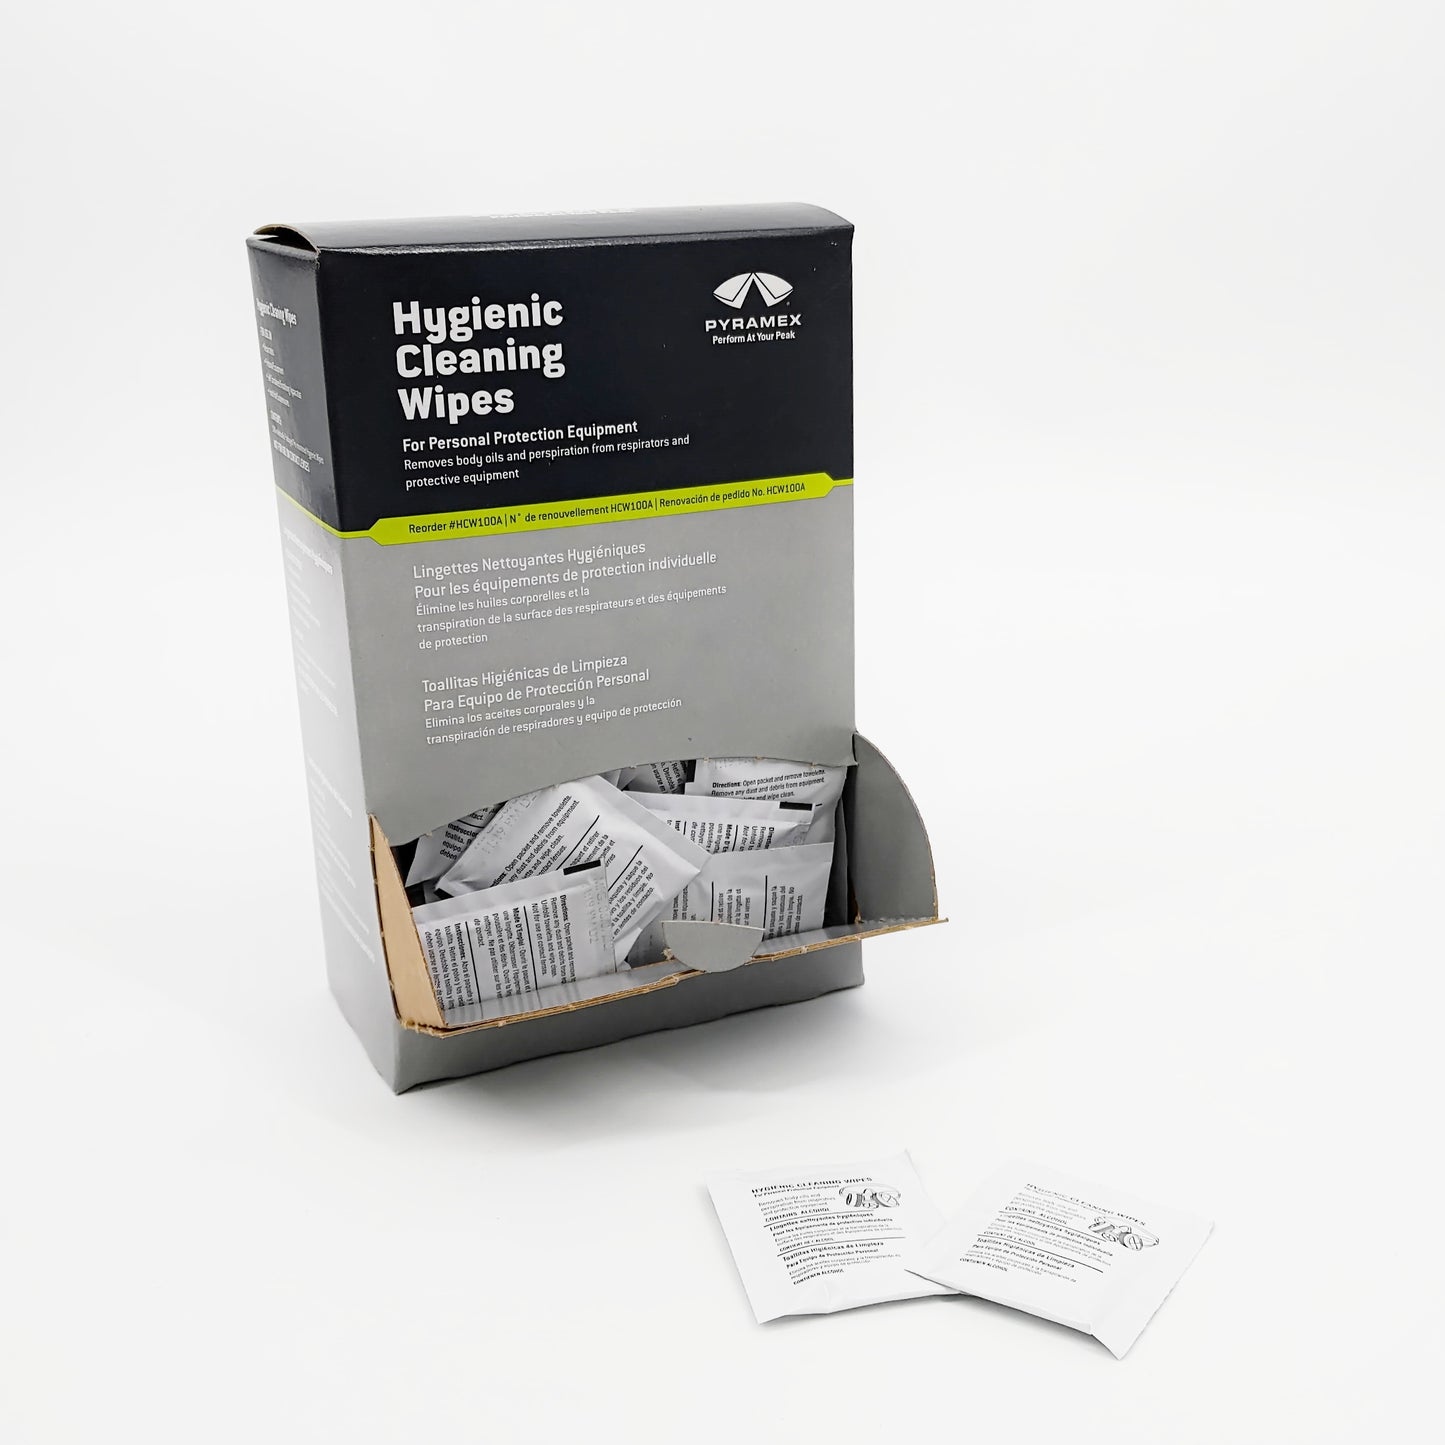 PYRAMEX Hygienic Cleaning Wipes with alcohol